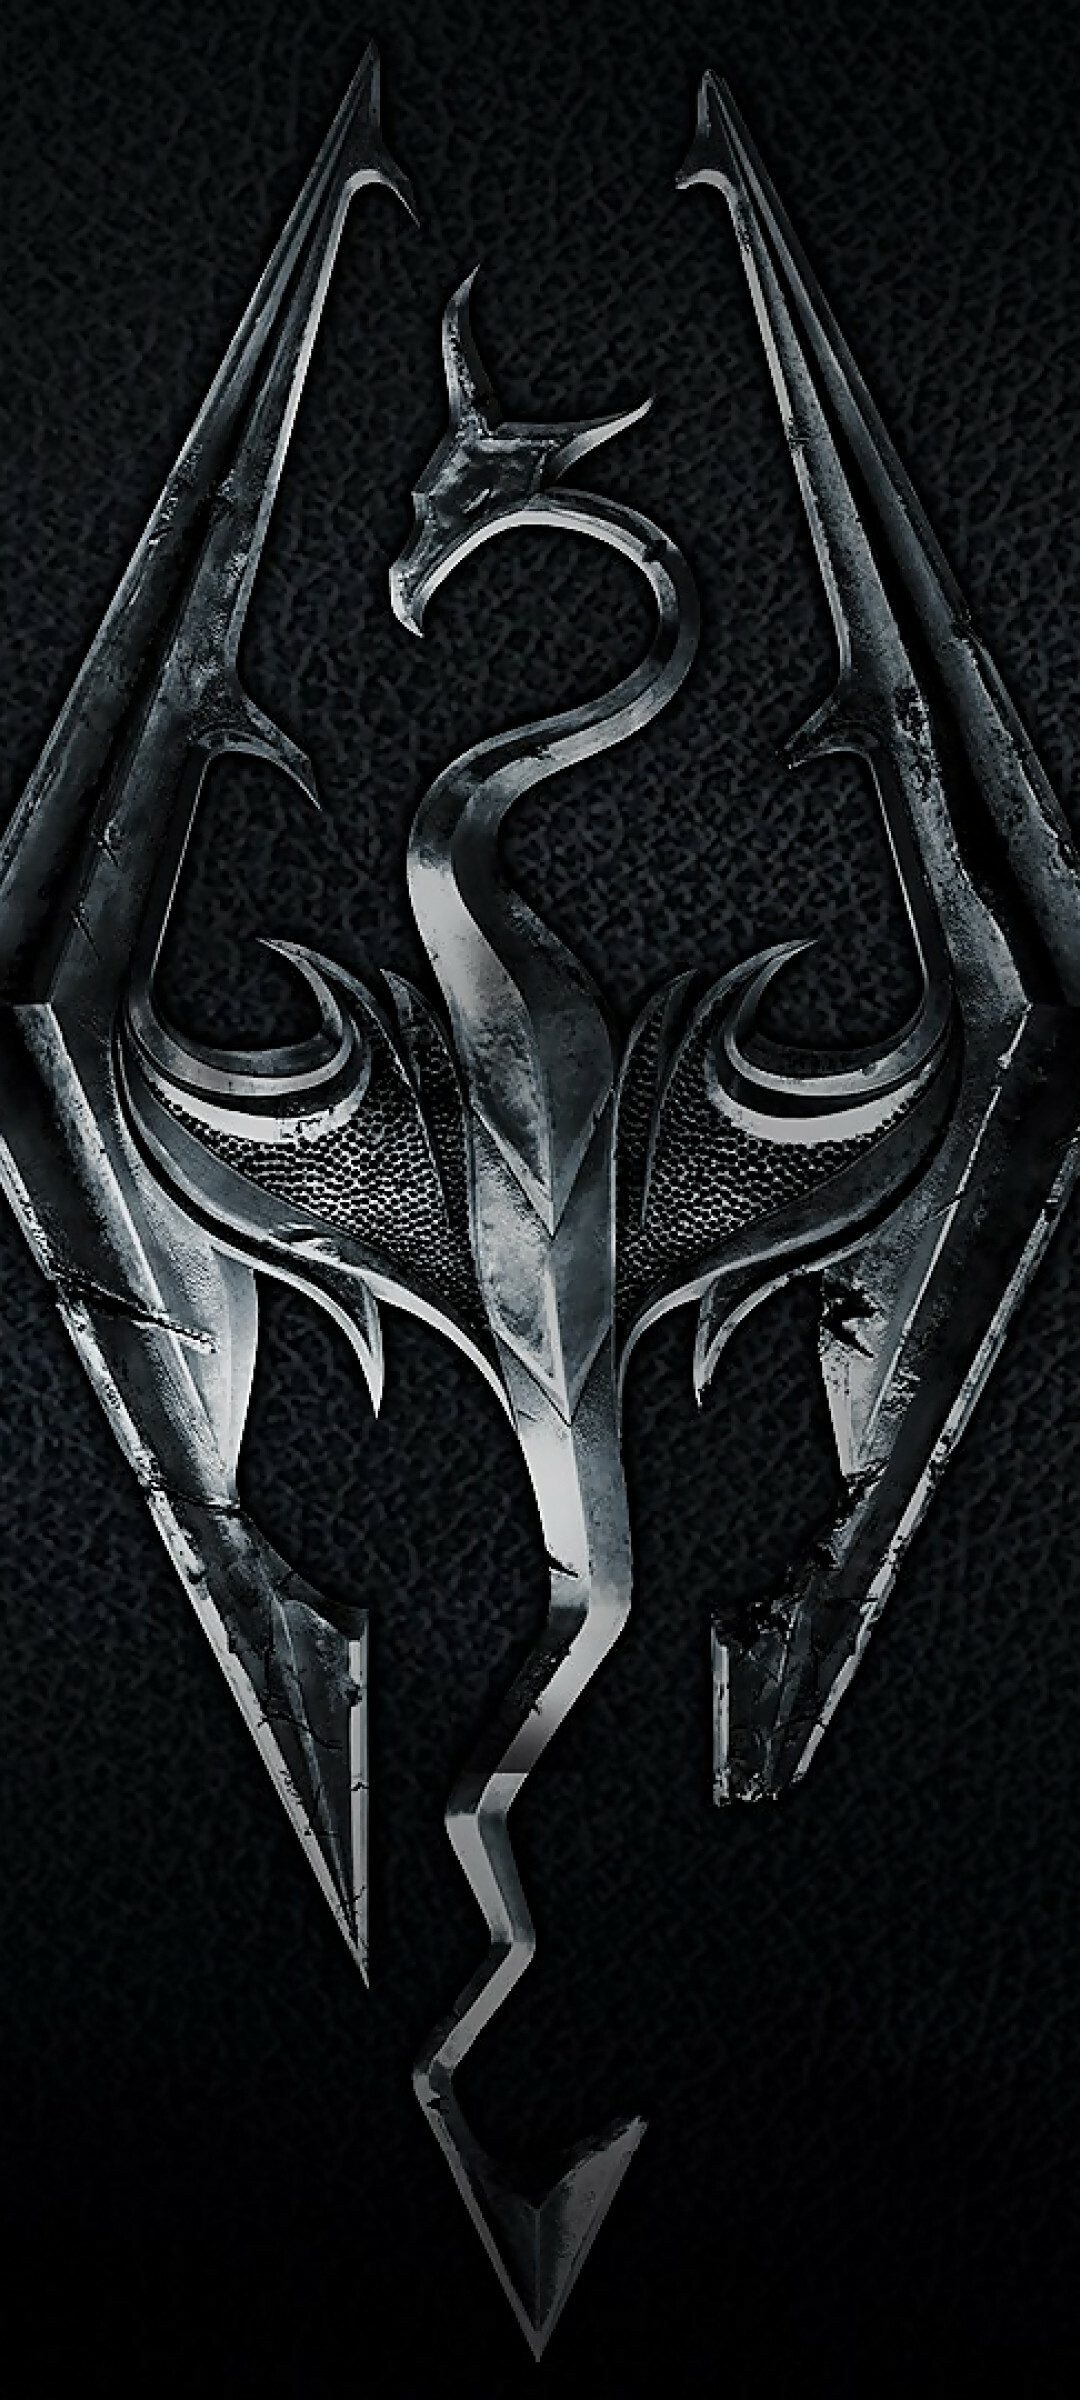 The Elder Scrolls: Skyrim, Set 200 years after the events of Oblivion, Logo. 1080x2400 HD Background.